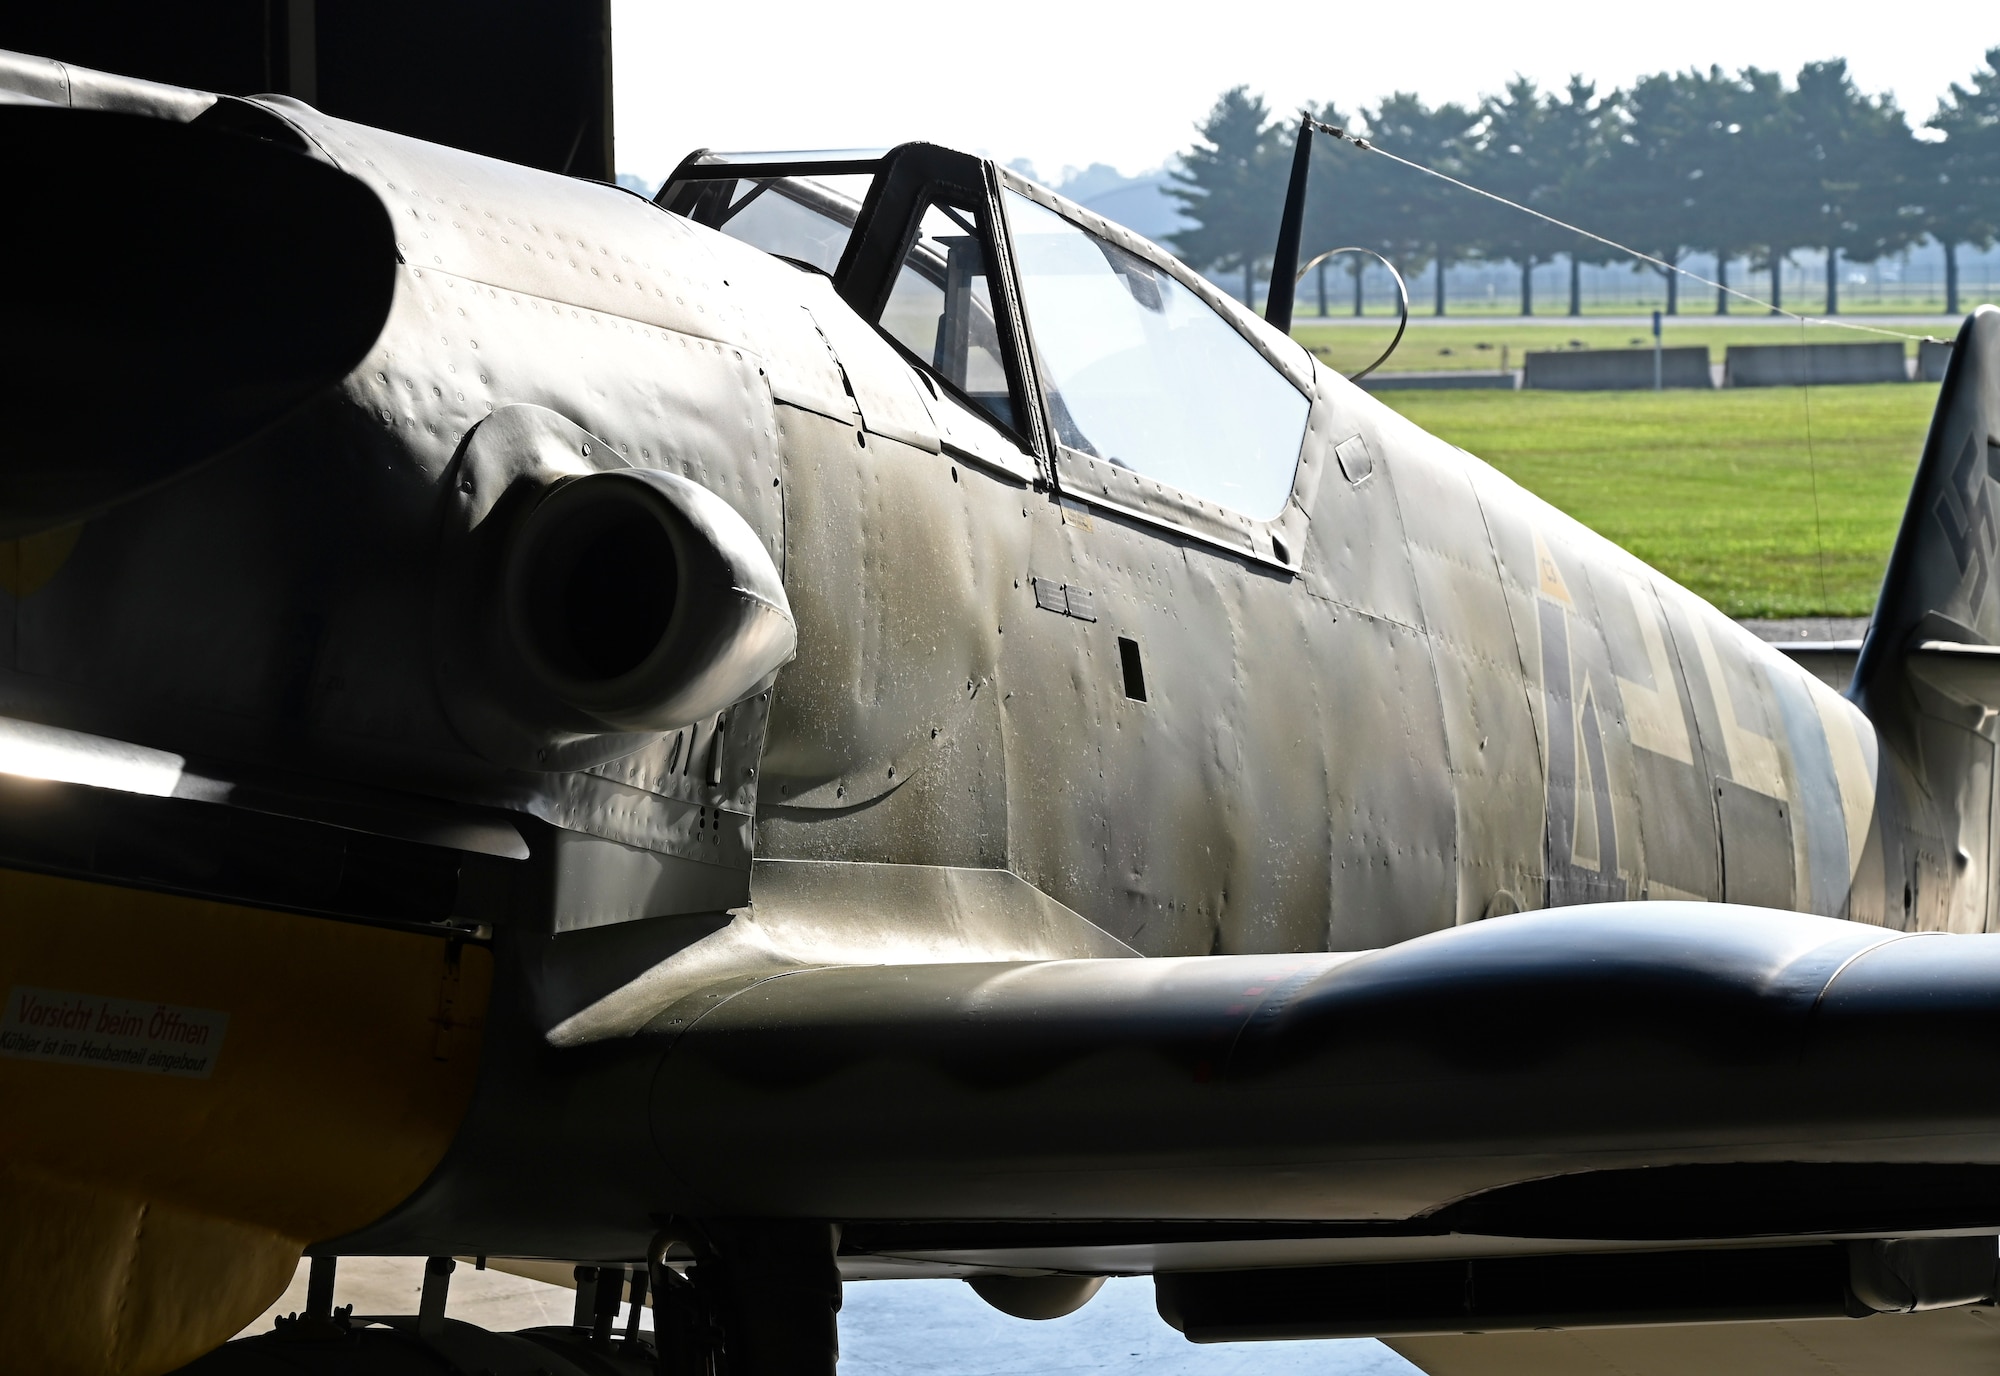 Messerschmitt Bf 109G-10 at the National Museum of the United States Air Force.